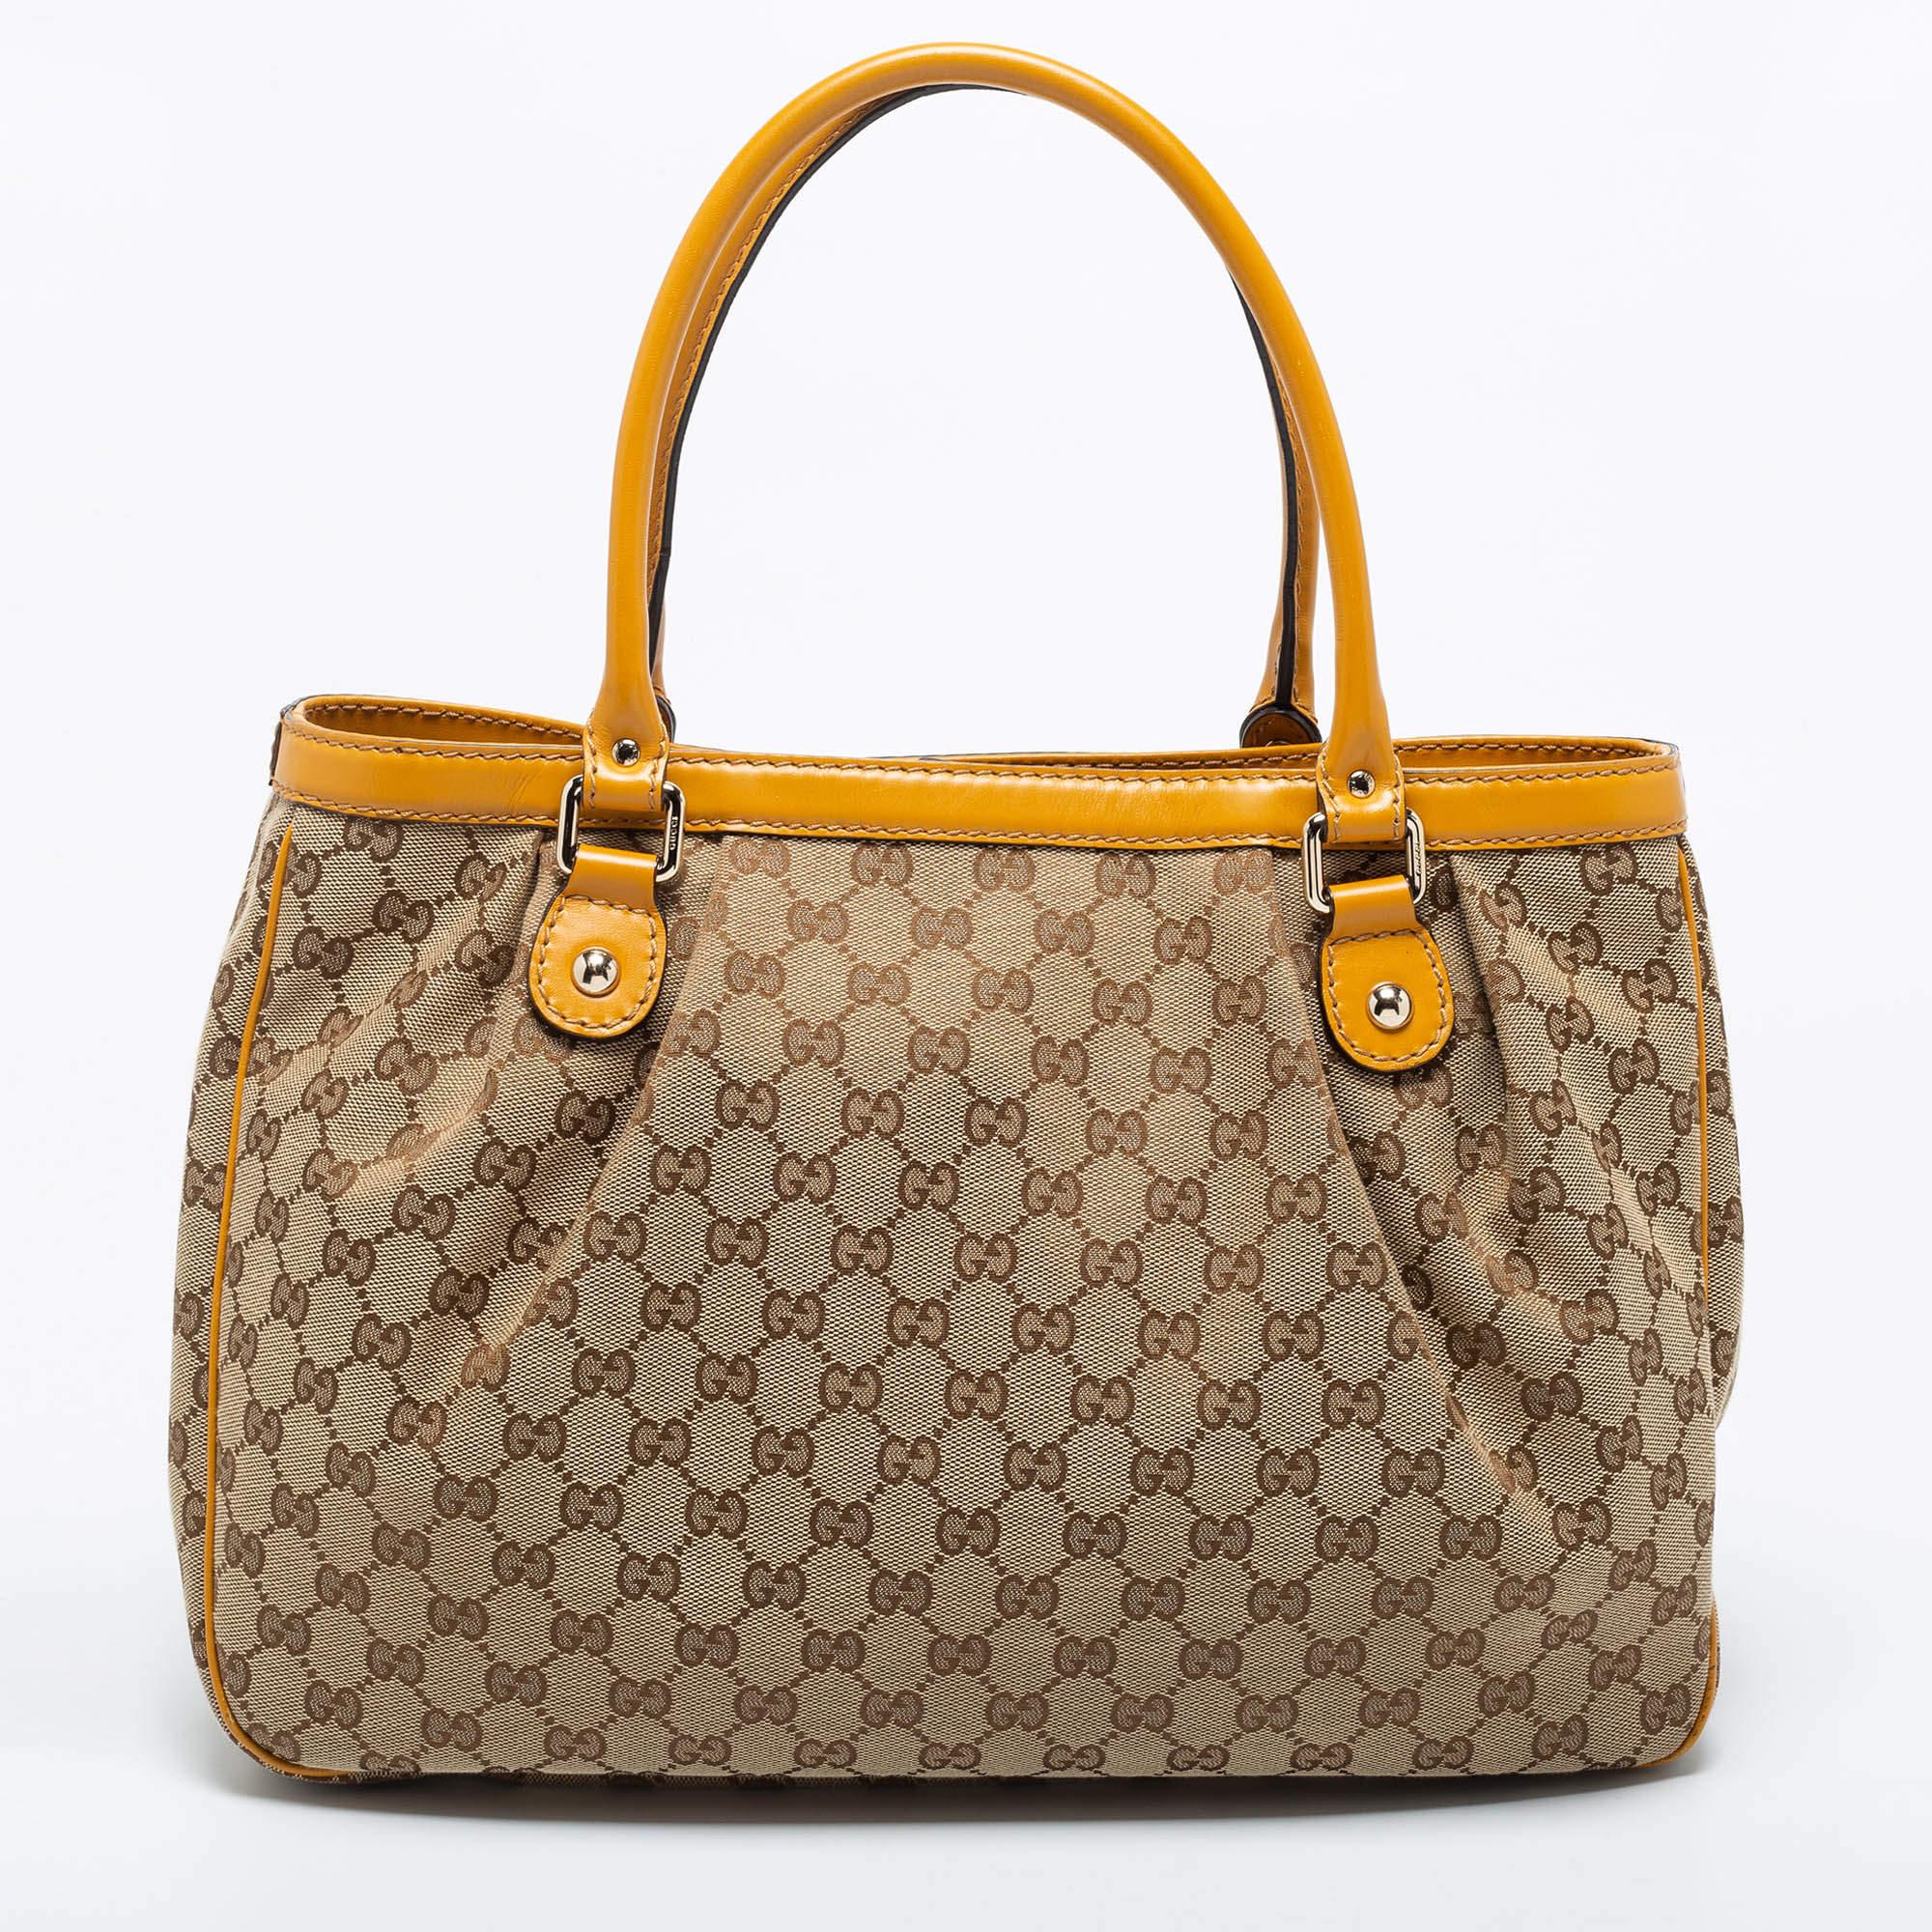 Enriched with signature details, this Sukey hobo from Gucci will surely win your vote as a favorite. It comes crafted from GG canvas and leather and flaunts dual handles at the top, a branded charm, and neat pleats. Lined with canvas, it is capable